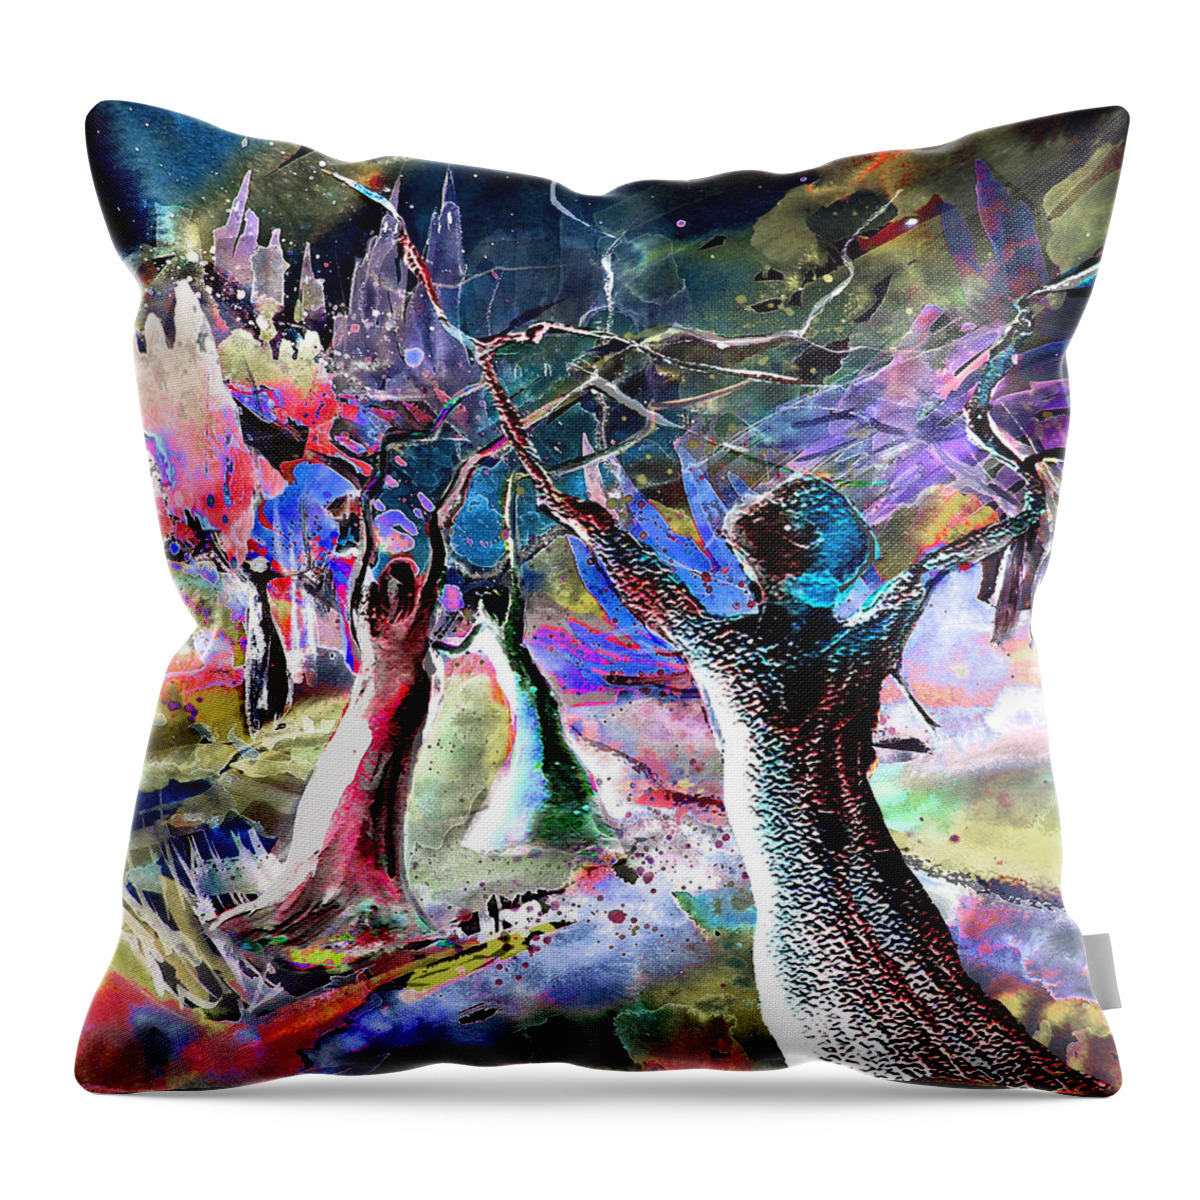 People Throw Pillow featuring the painting The Klan by Miki De Goodaboom